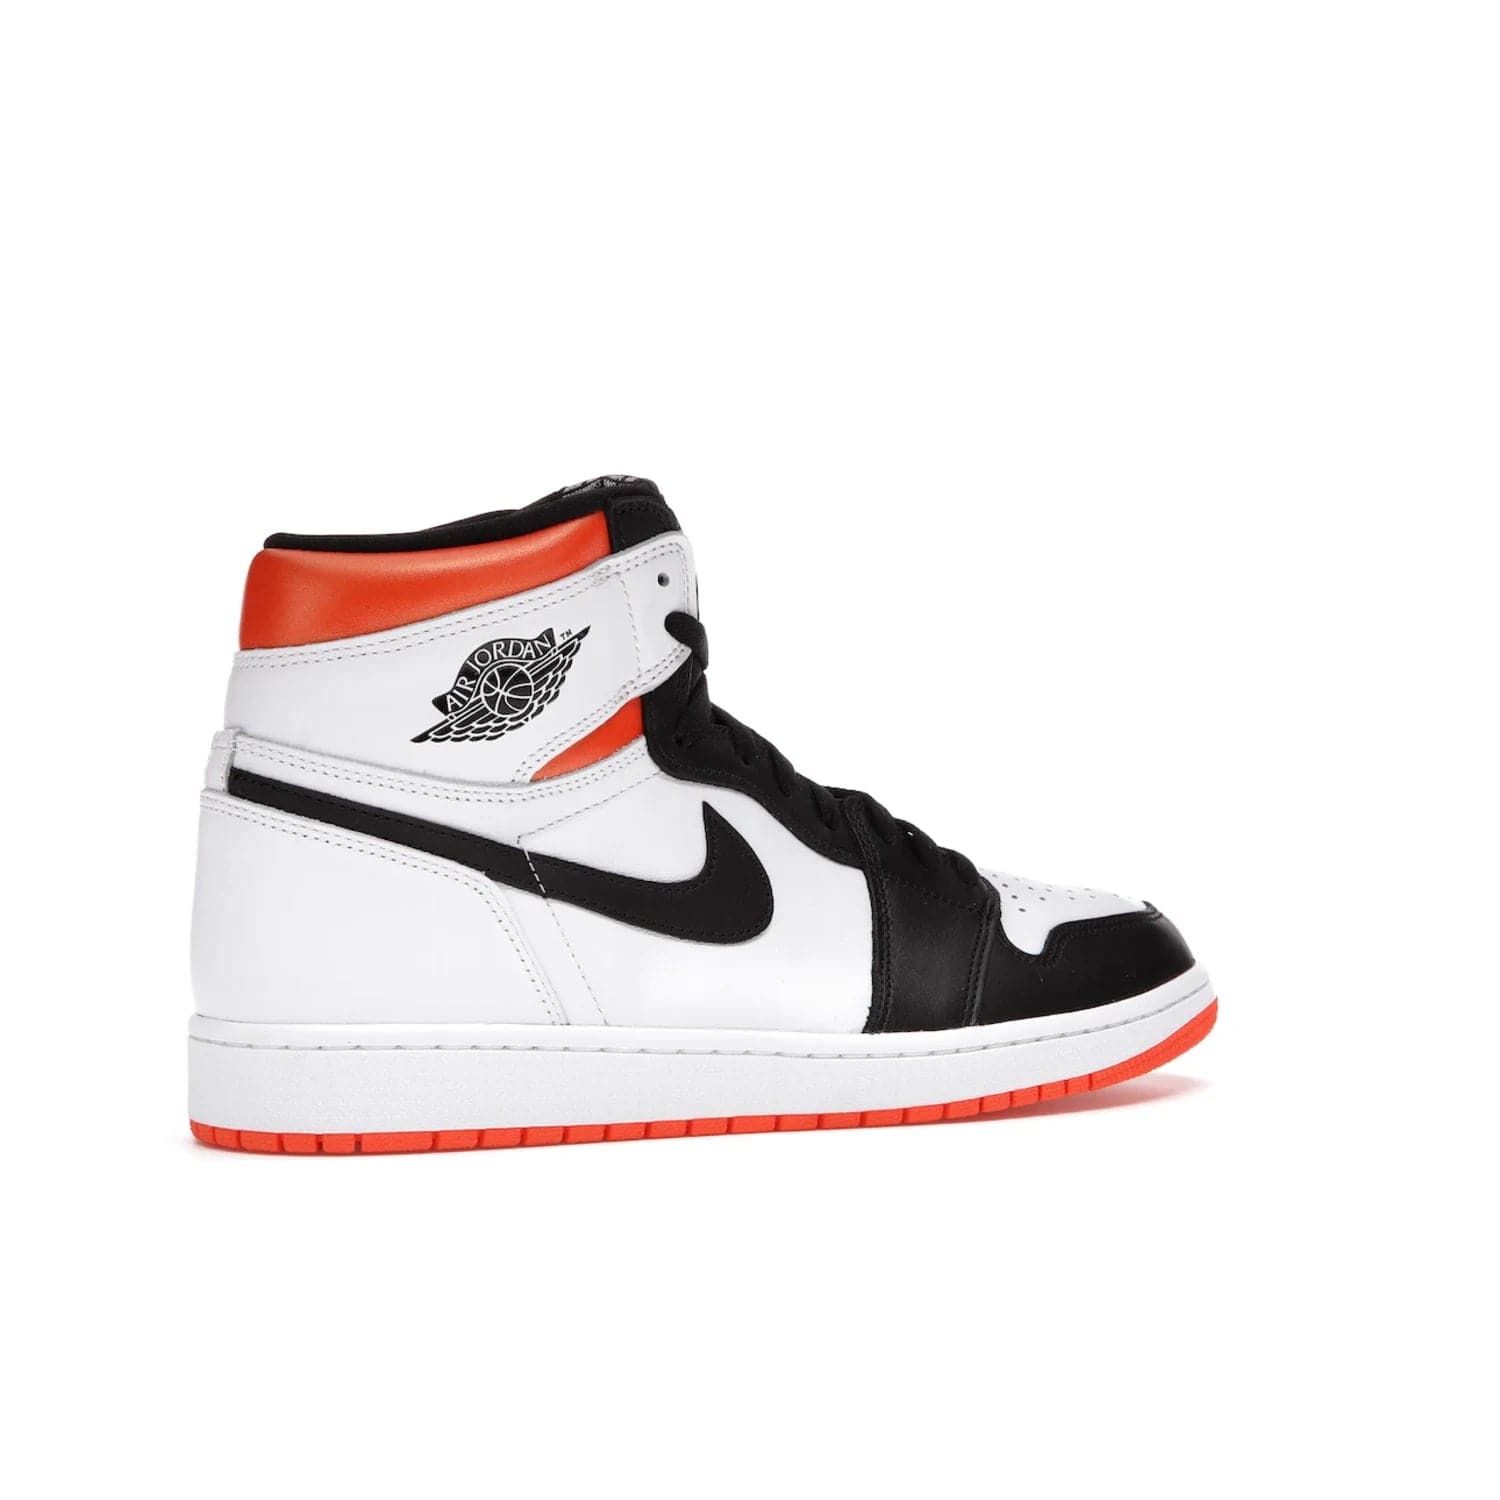 Jordan 1 Retro High Electro Orange - Image 34 - Only at www.BallersClubKickz.com - This Air Jordan 1 Retro High Electro Orange features a white leather upper with black overlays and vibrant Hyper Orange ankle wrap. Turn heads with this iconic design of woven tongue label and sole. Get yours today and add some serious style to your rotation.